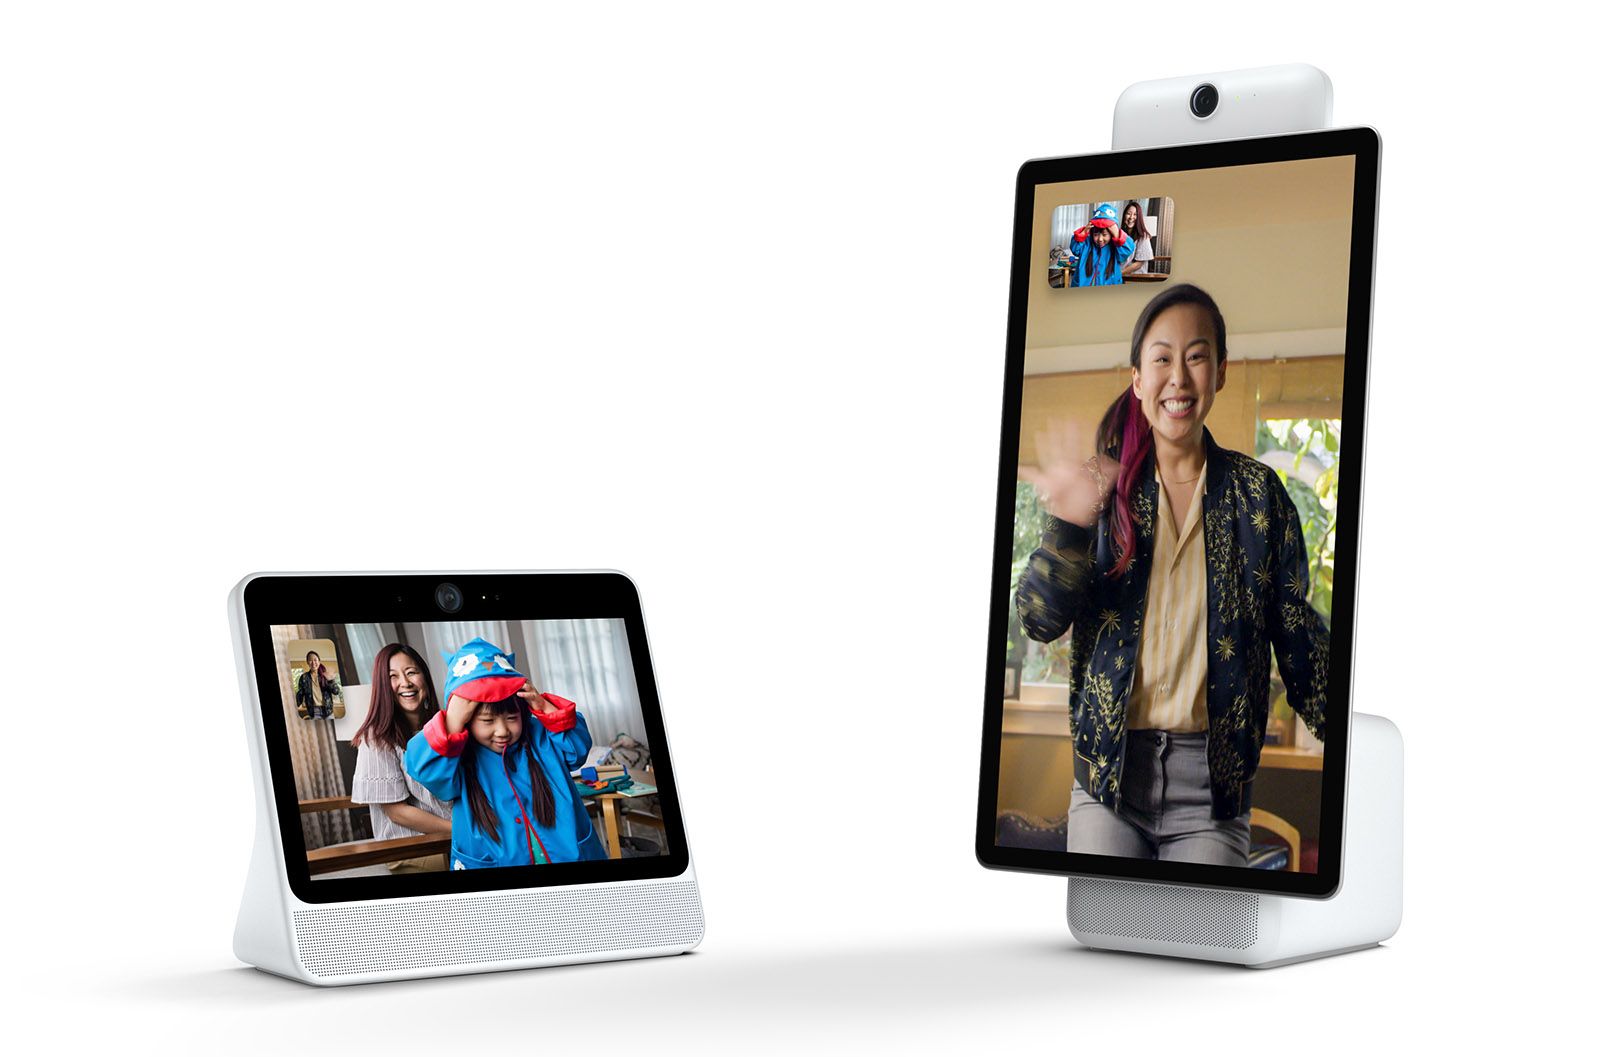 Facebook Portal And Portal Take Aim At Echo Show With Video Calling And Alexa Built-in image 2